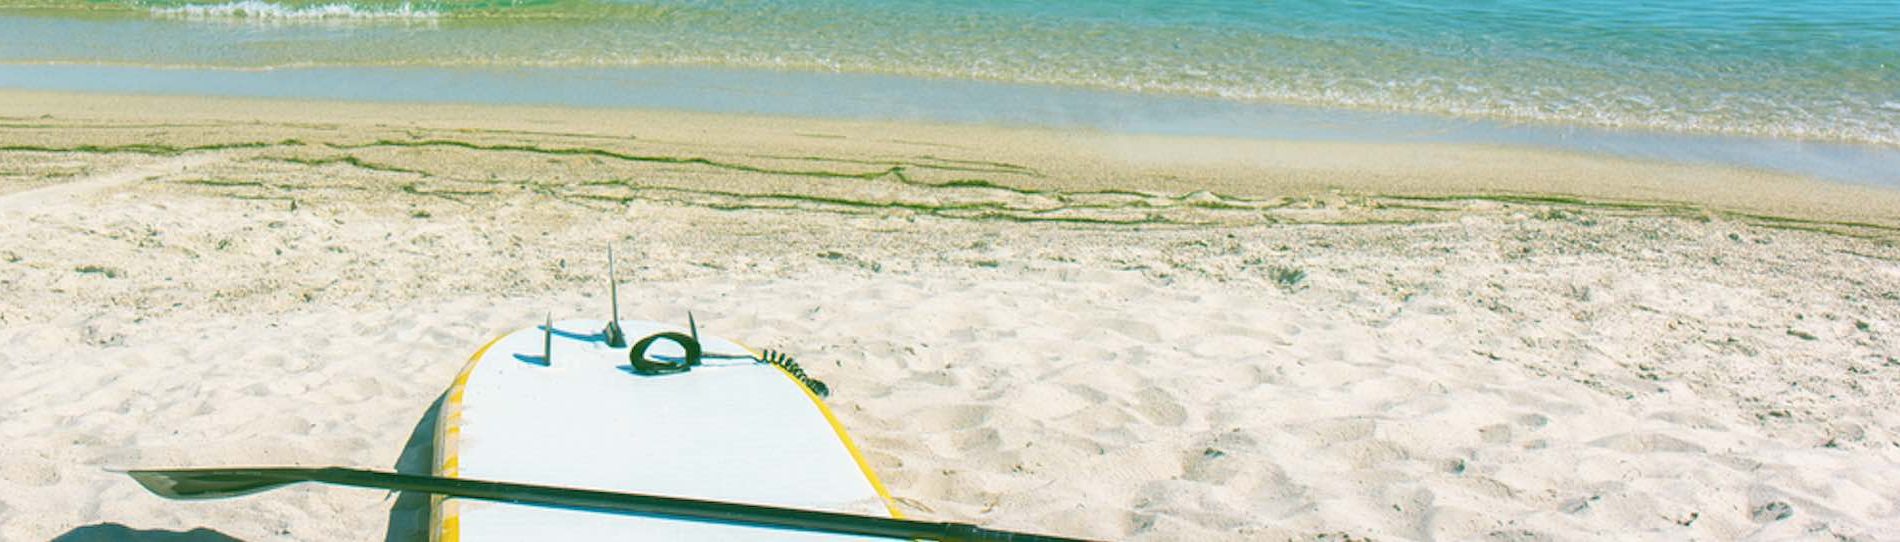 stand up paddle board on beach